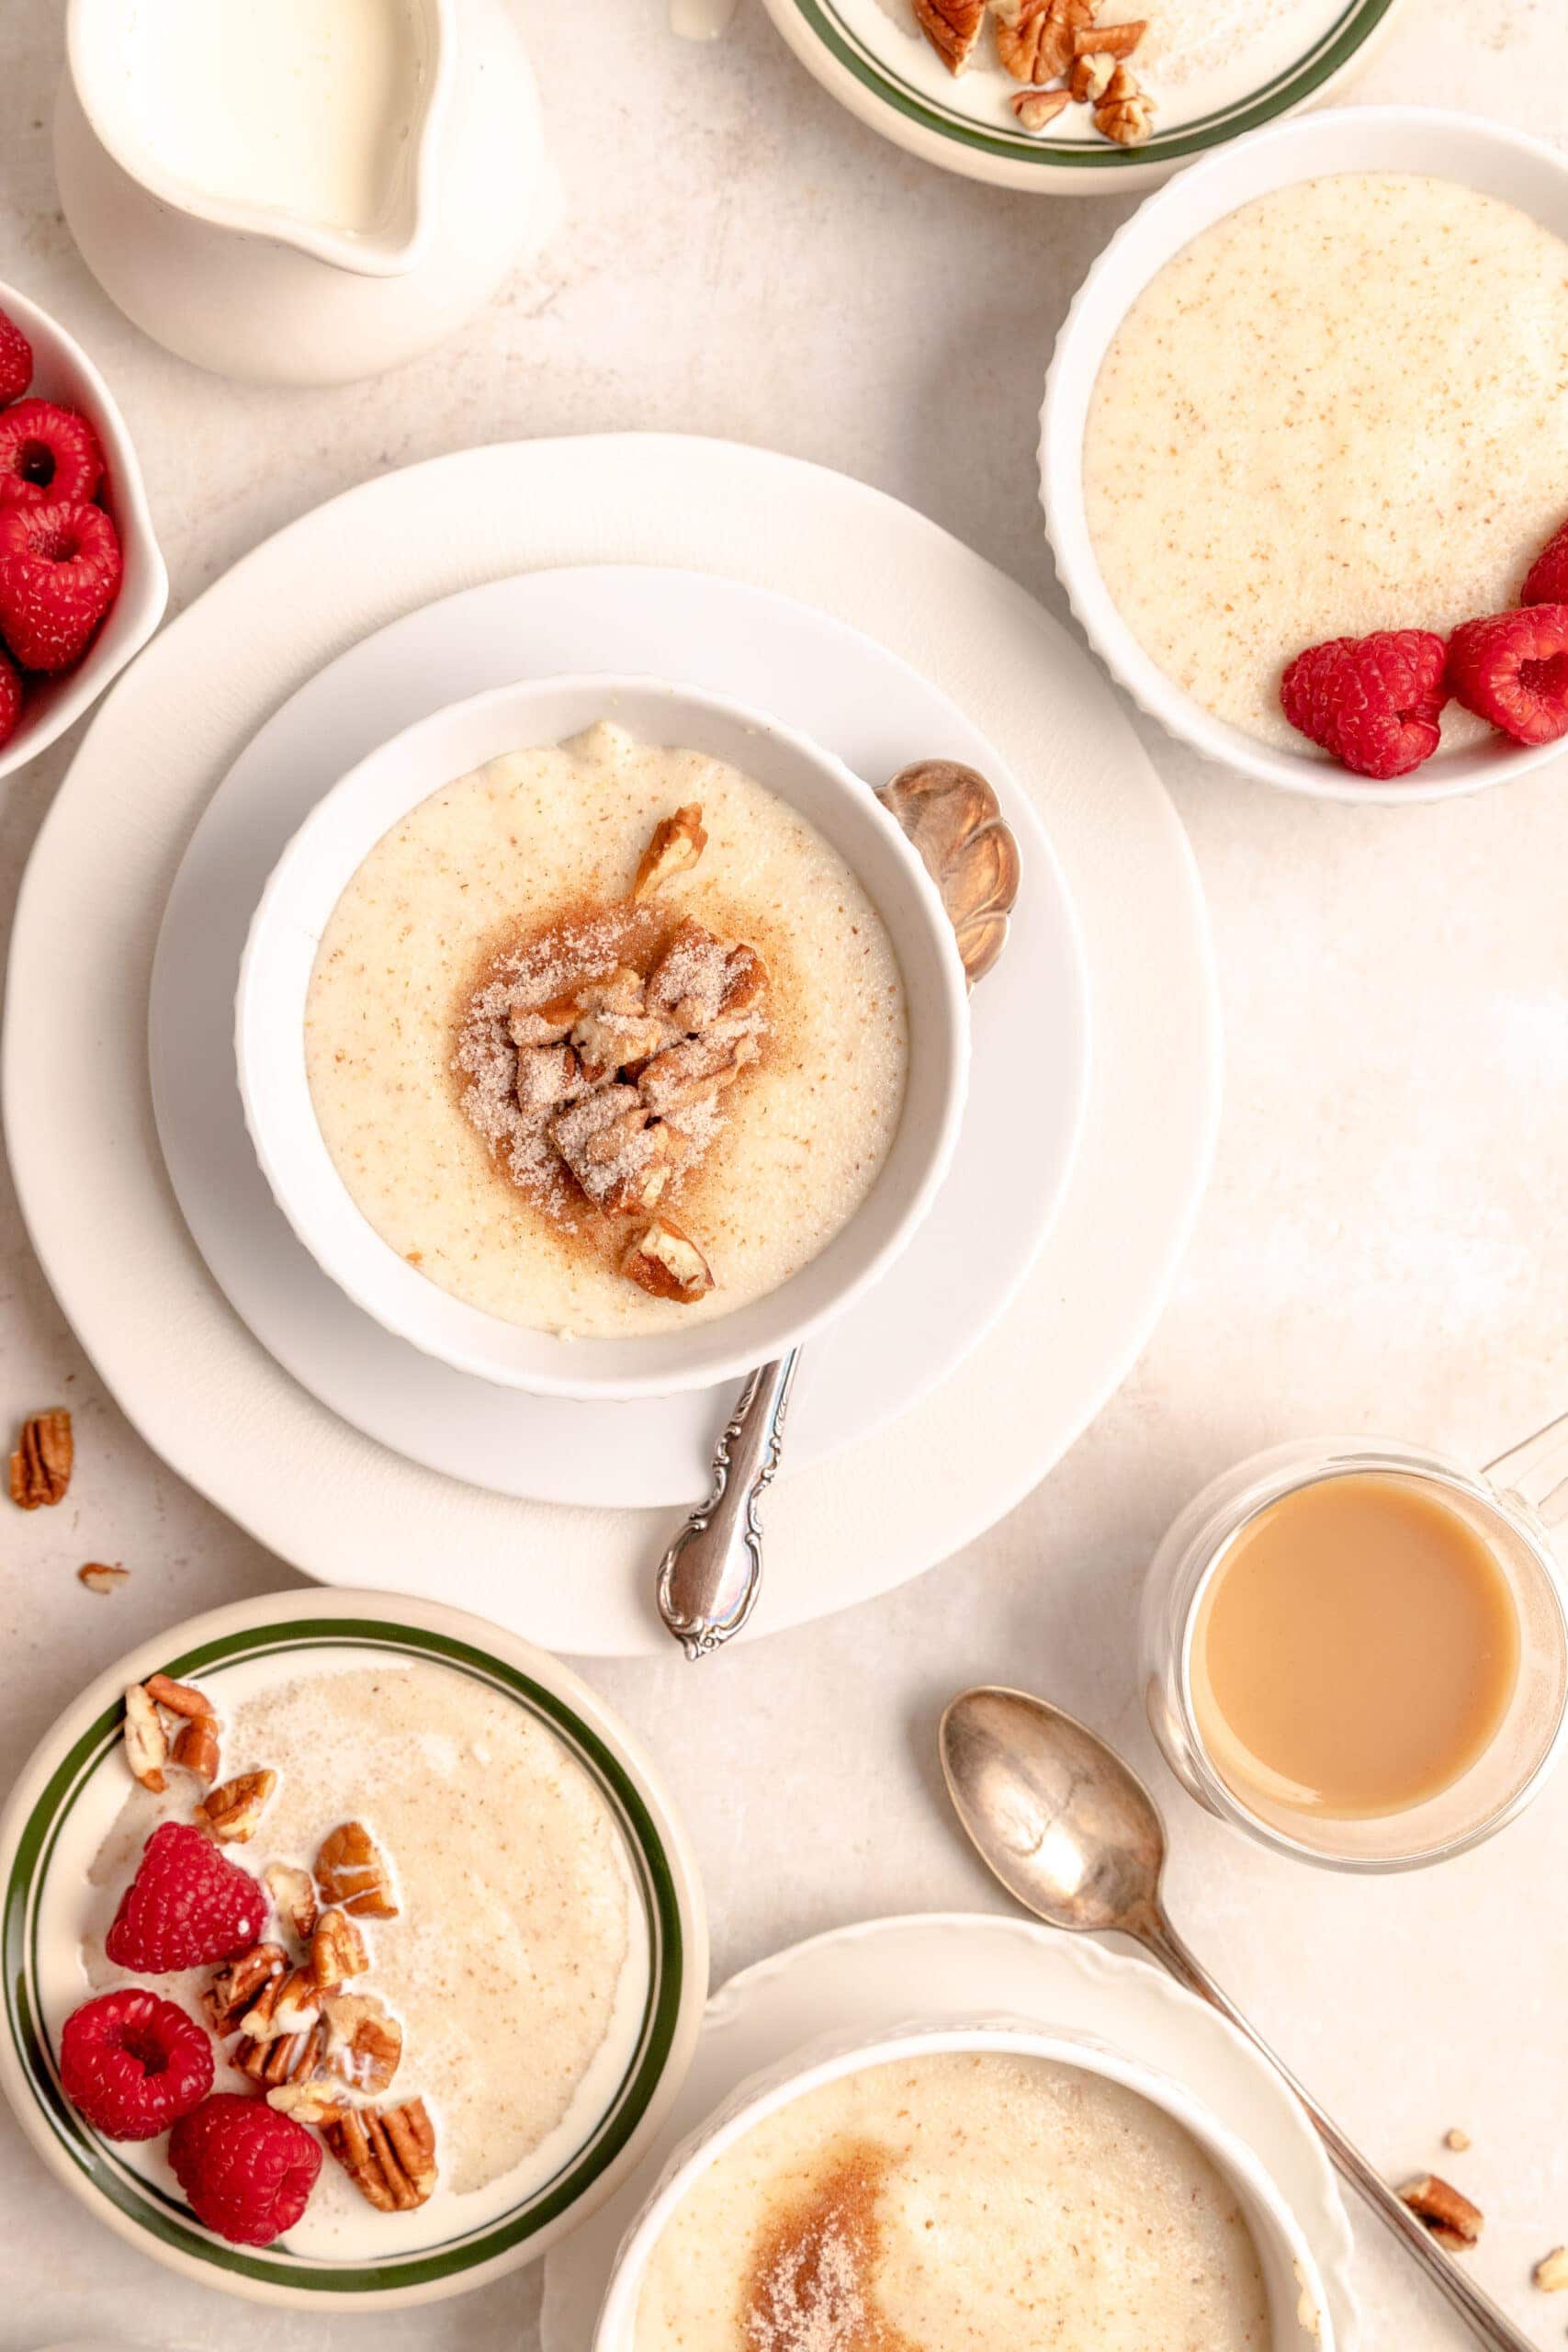 Overhead image of table with multiple bowls of Grießbrei topped with nuts, cinnamon sugar and raspberries.